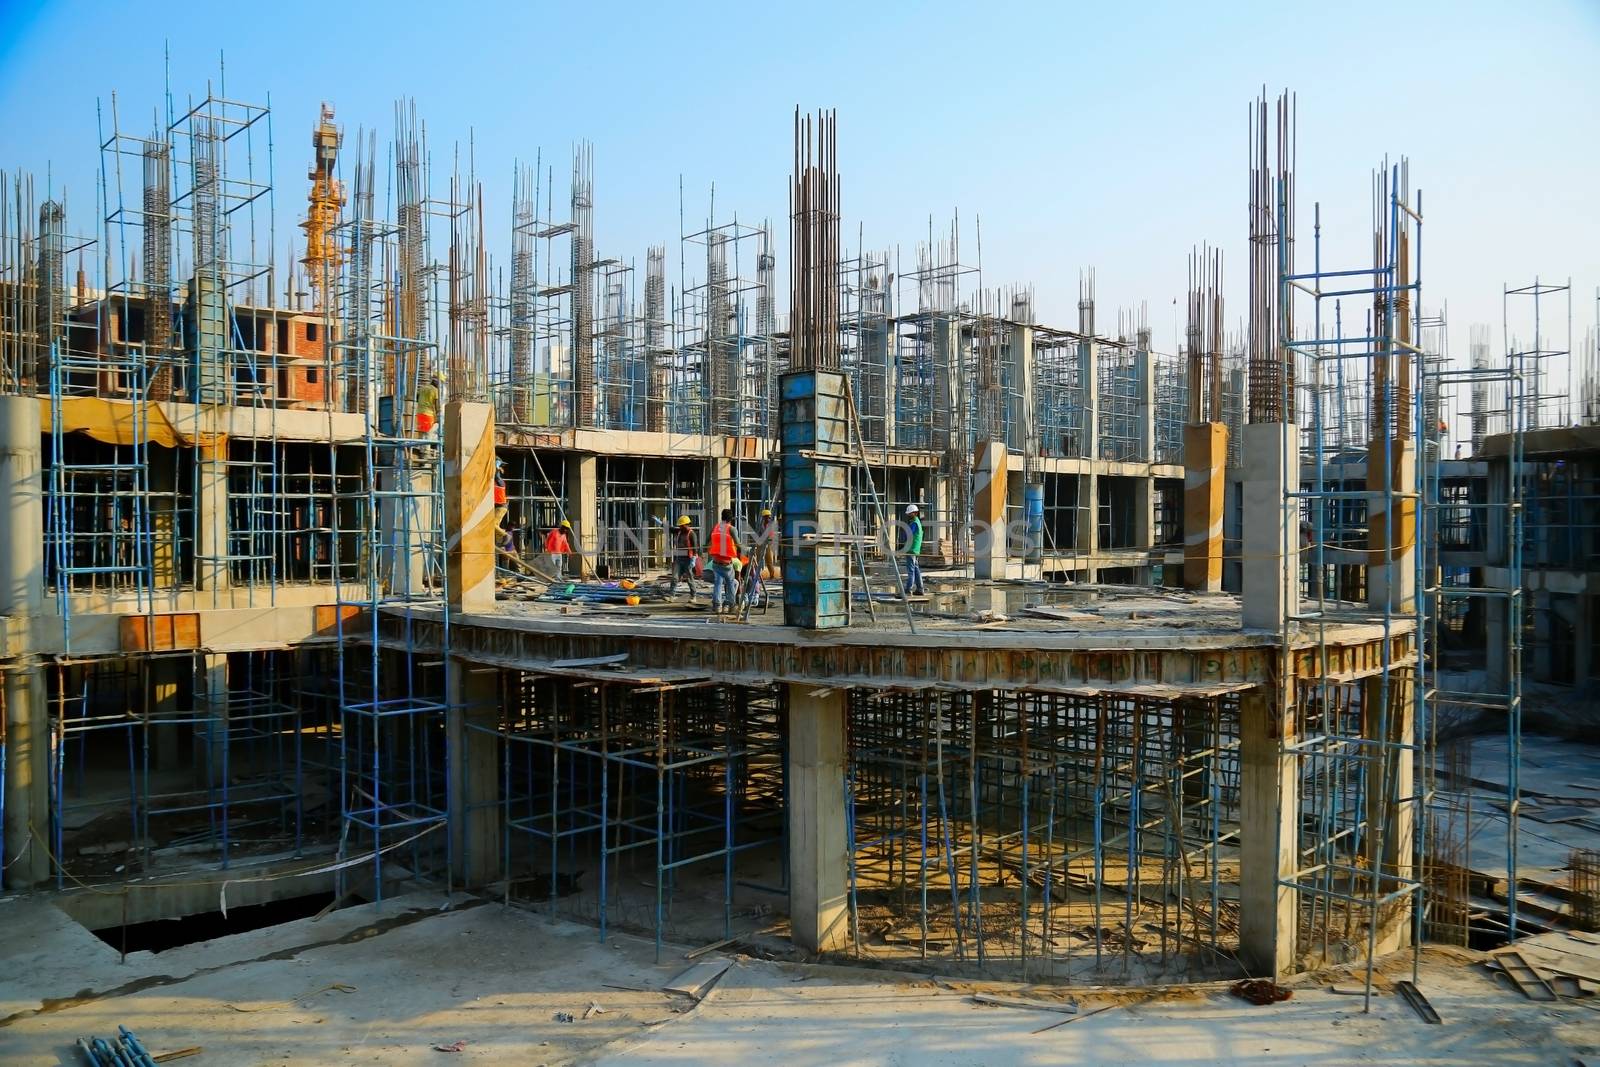 pune, India - march 2018 : new construction of building in pune